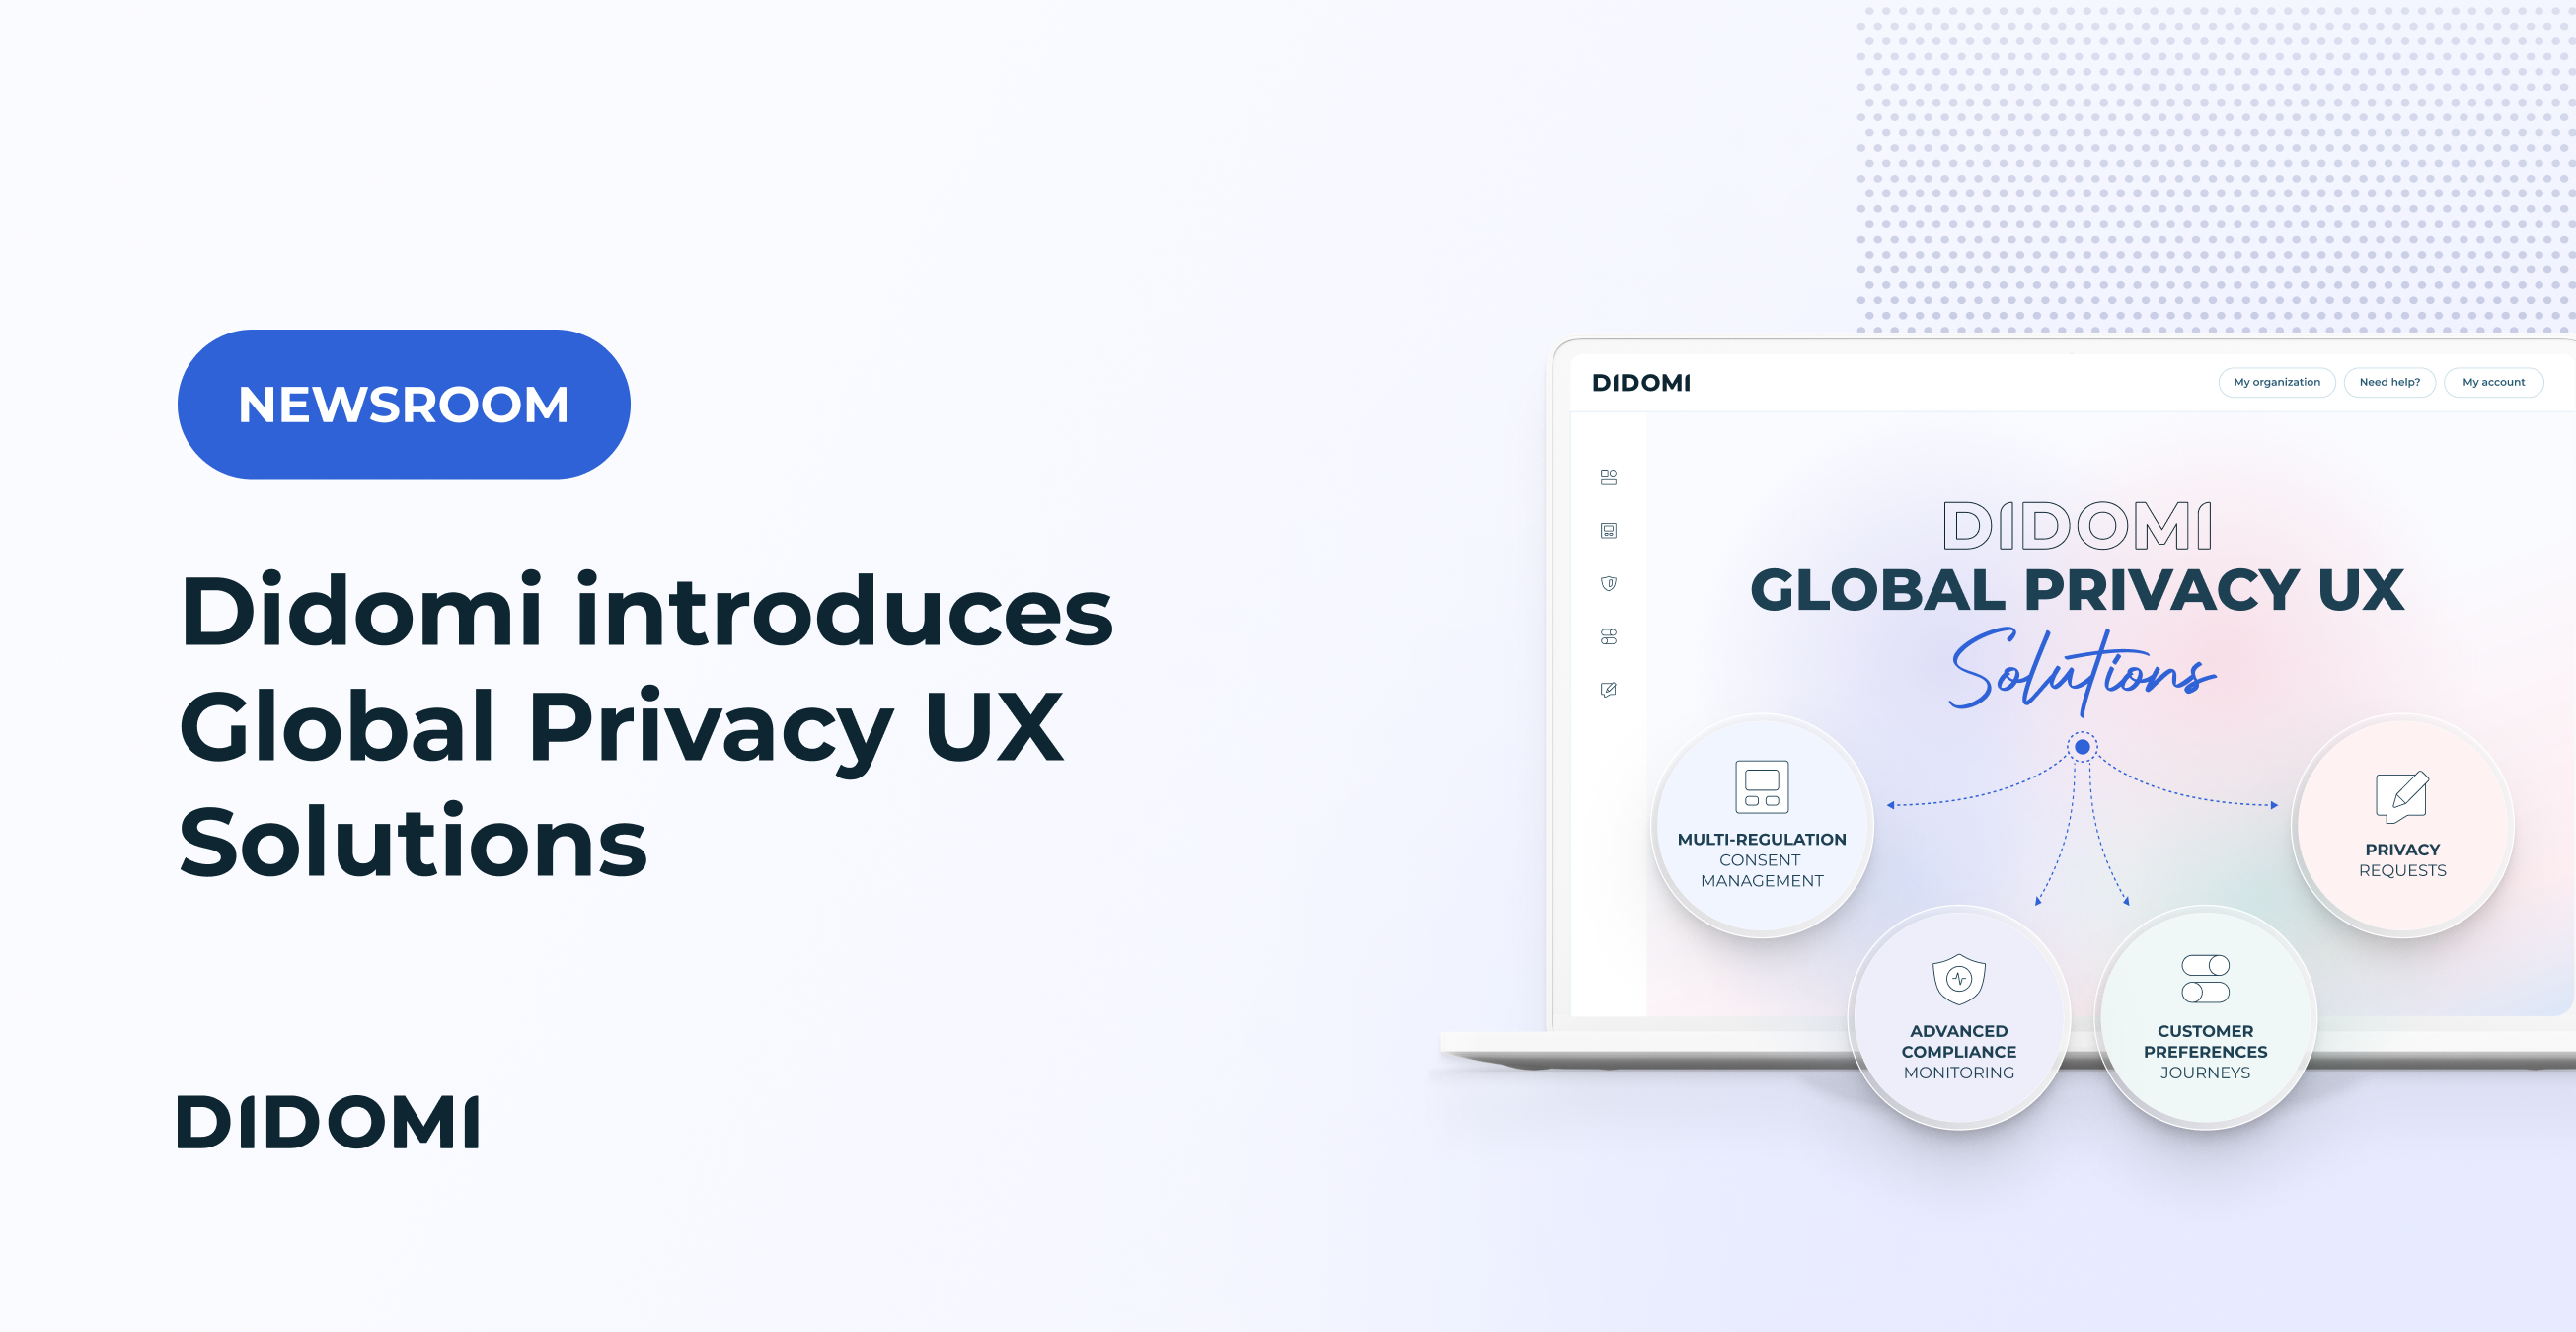 Didomi introduces Global Privacy UX Solutions